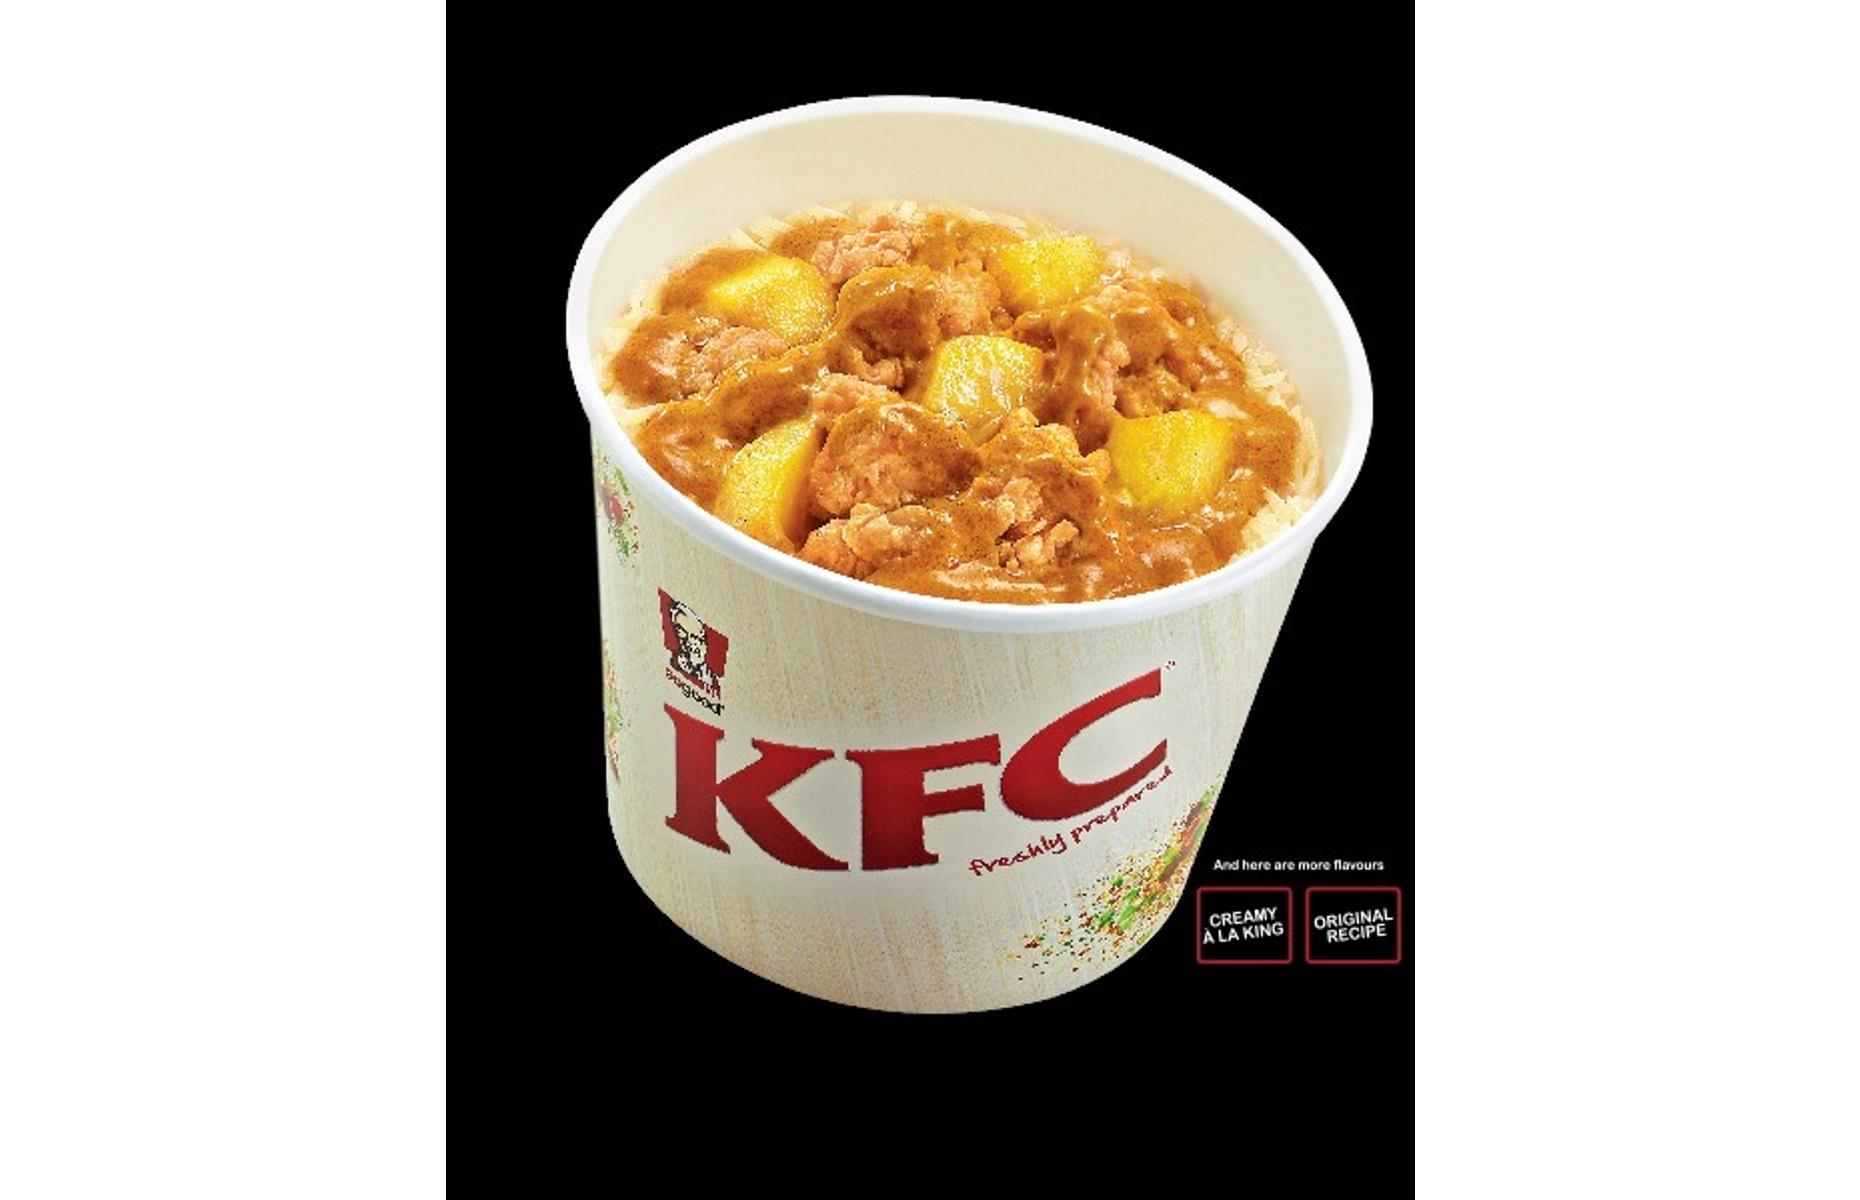 <p>You’ve heard of Bargain Buckets and Wicked Variety Buckets, but you may not be familiar with Curry Rice Buckets. This unique dish, featuring Popcorn Chicken served over fragrant chicken rice and topped with creamy potato curry, went on sale at KFC in Singapore in 2015. It was a hit with customers but no longer features on the menu.</p>